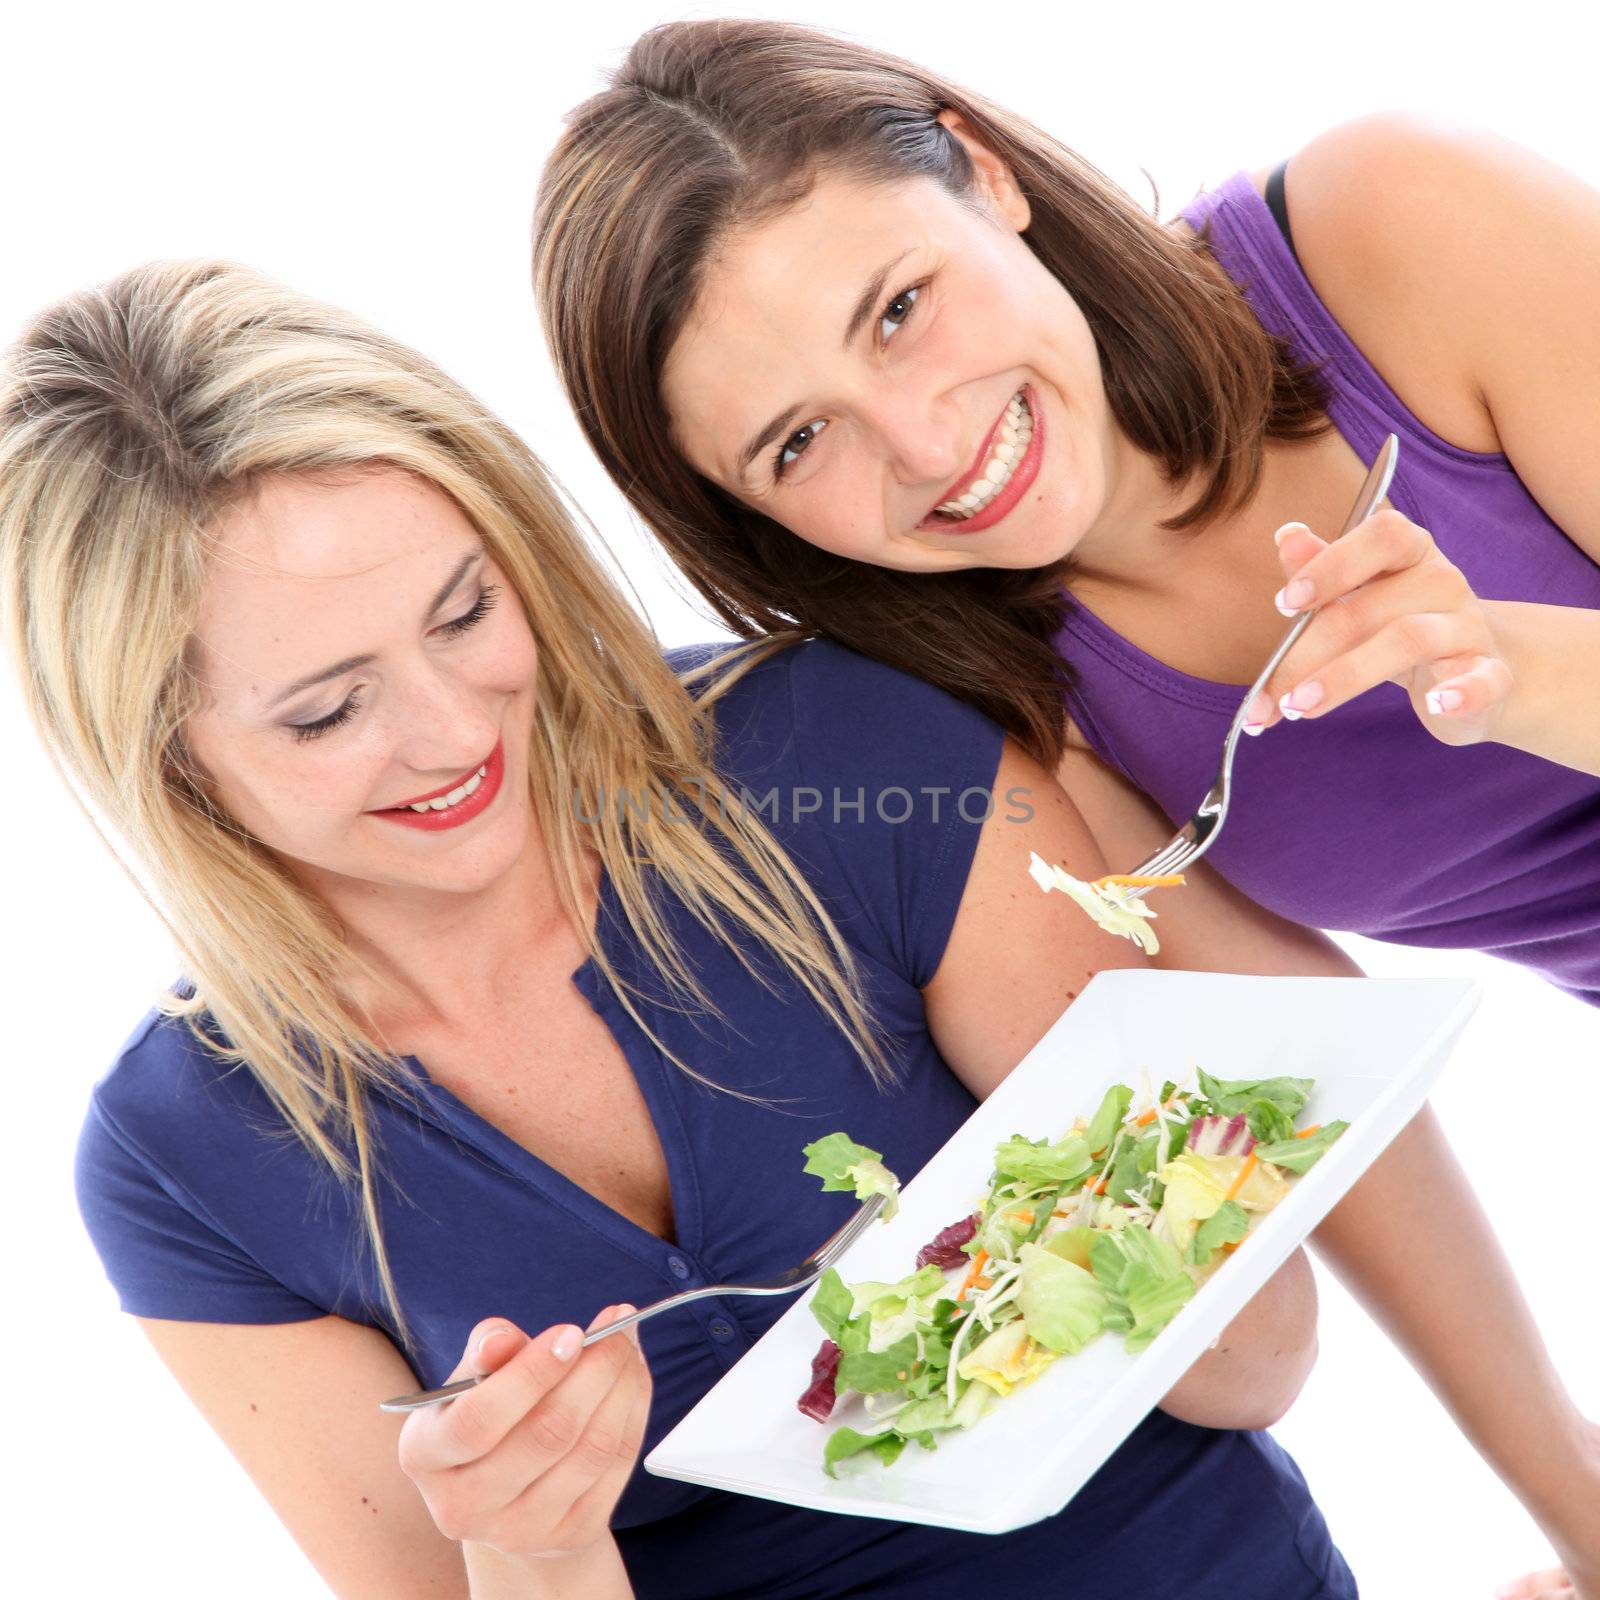 Female friends sharing a plate of salad Female friends sharing a plate of salad  by Farina6000